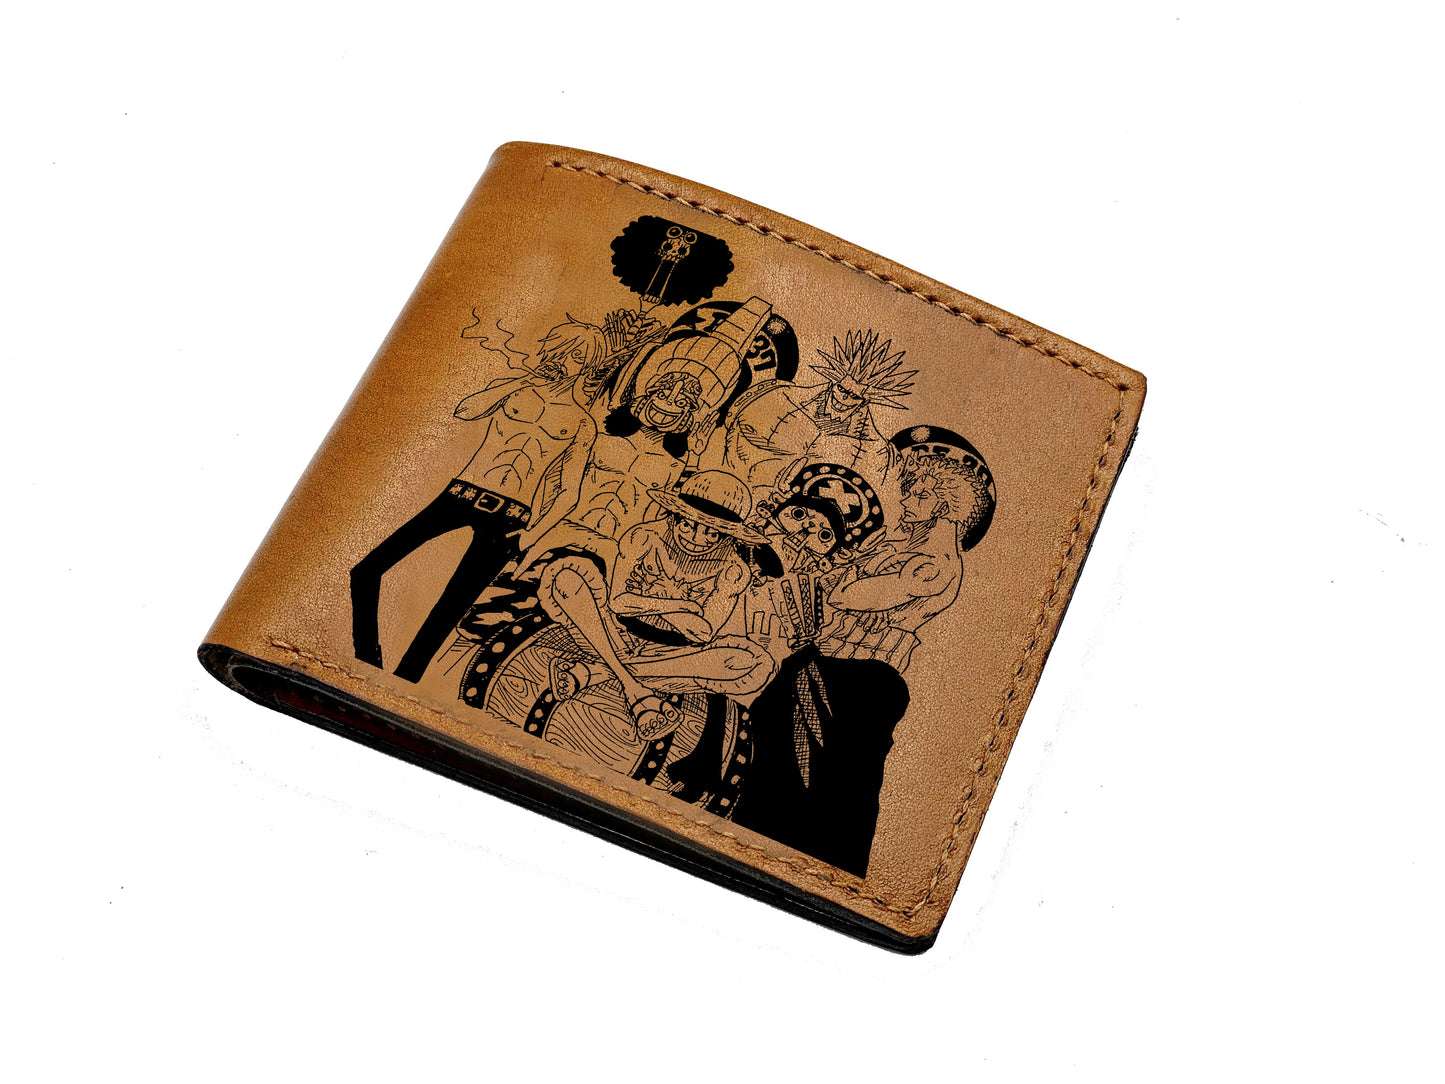 Mayan Corner - Personalized small leather wallet, One Piece Zoro men's wallet, anniversary present for him, christmas gift idea for friend